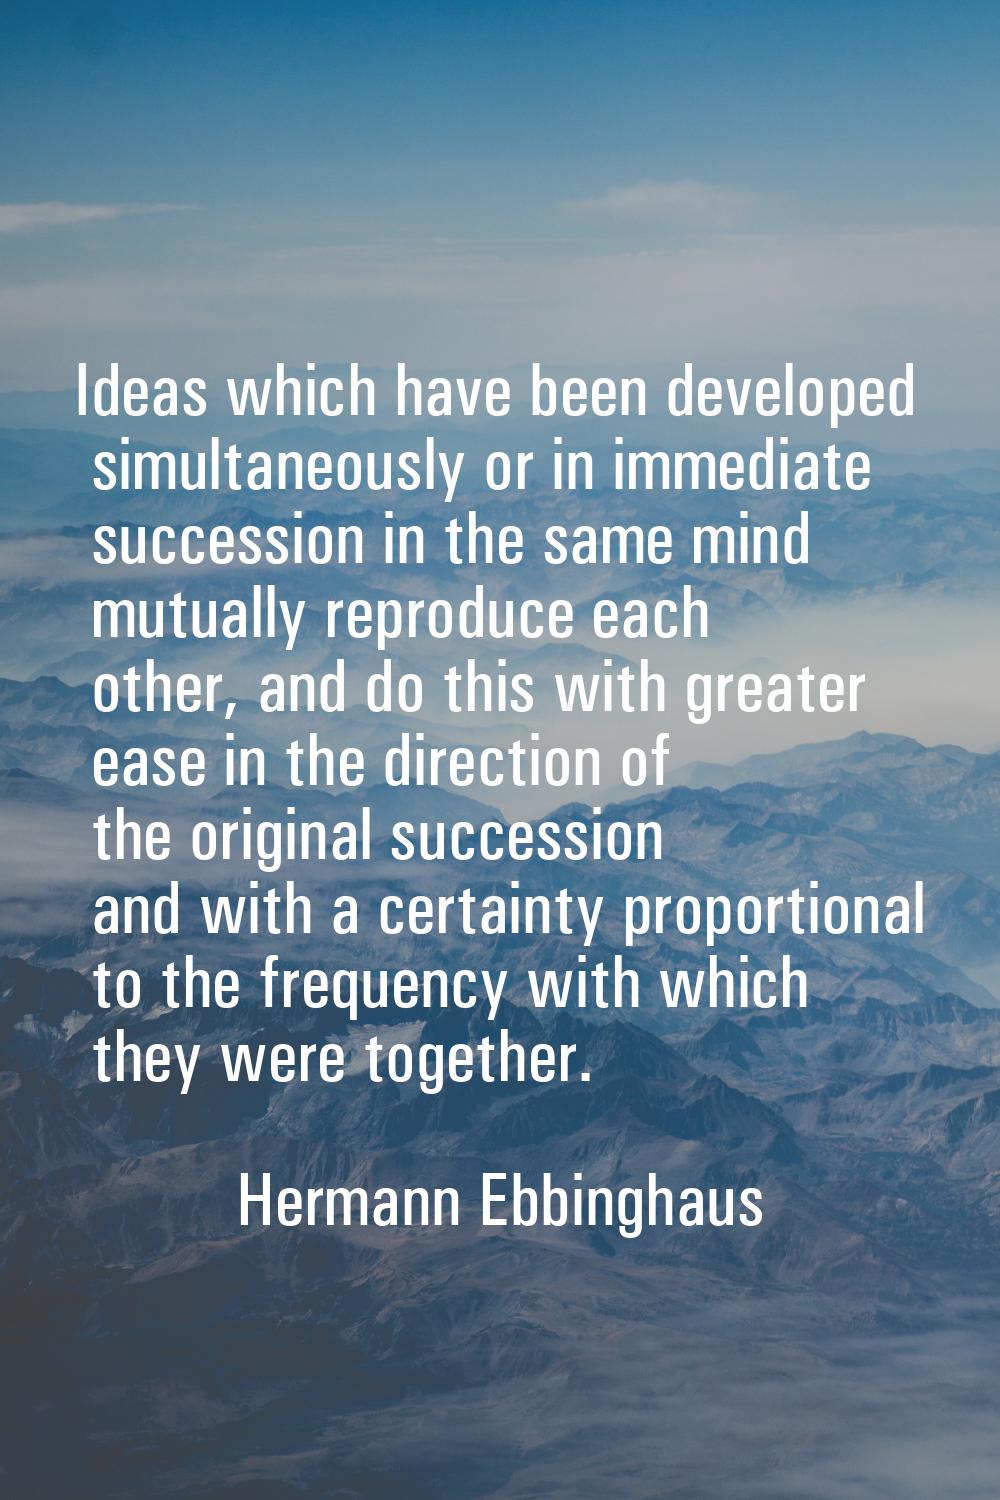 Ideas which have been developed simultaneously or in immediate succession in the same mind mutually